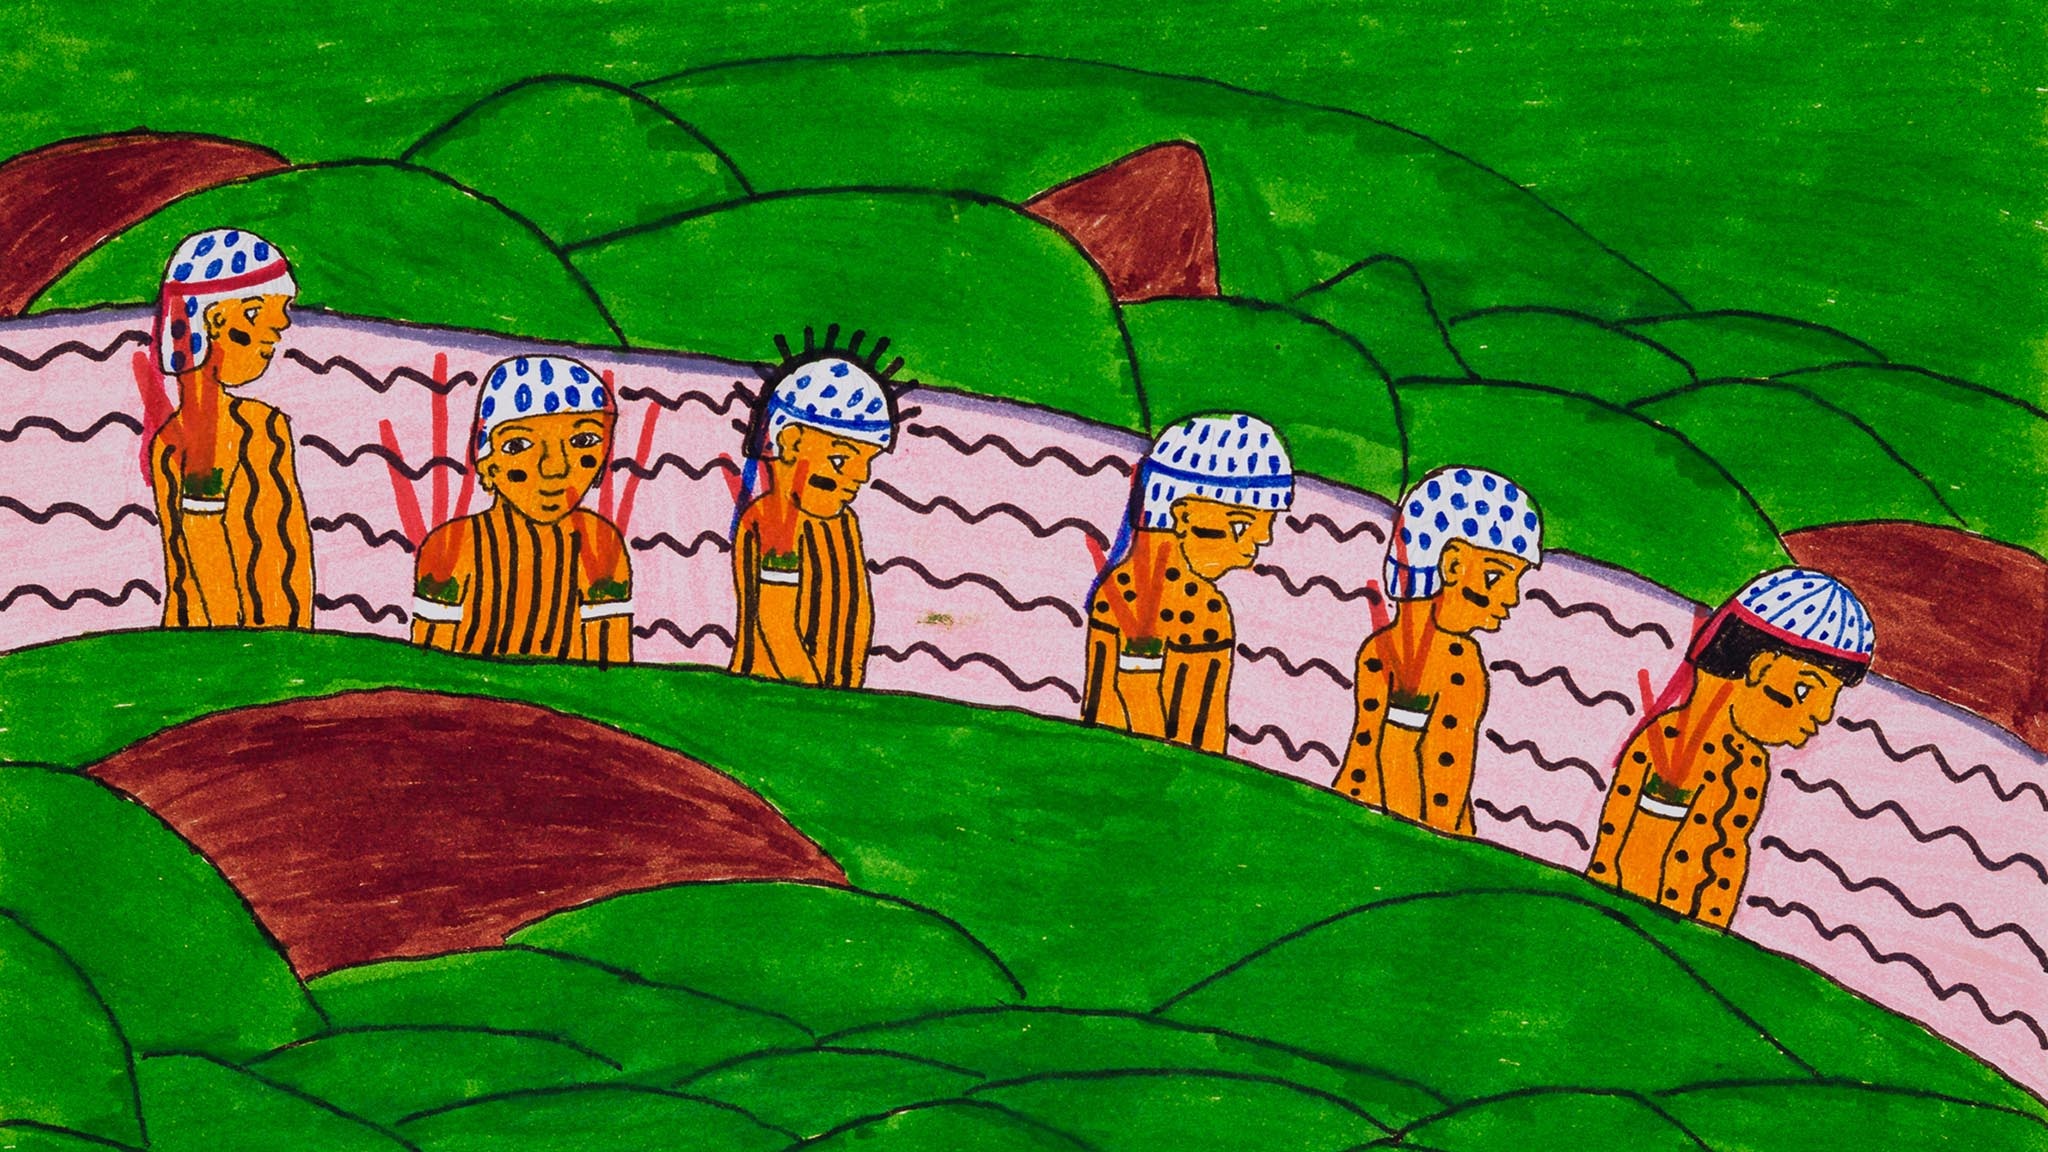 A felt pen drawing depicting a line of six Indigenous Yanomami people going down a river represented by pale pink water and squiggly black lines for waves. On either side of the river are rich green hills. The Yanomami wear white head coverings with blue designs of lines and dots and their bodies are decorated with lines and dots as well, representing body paint..